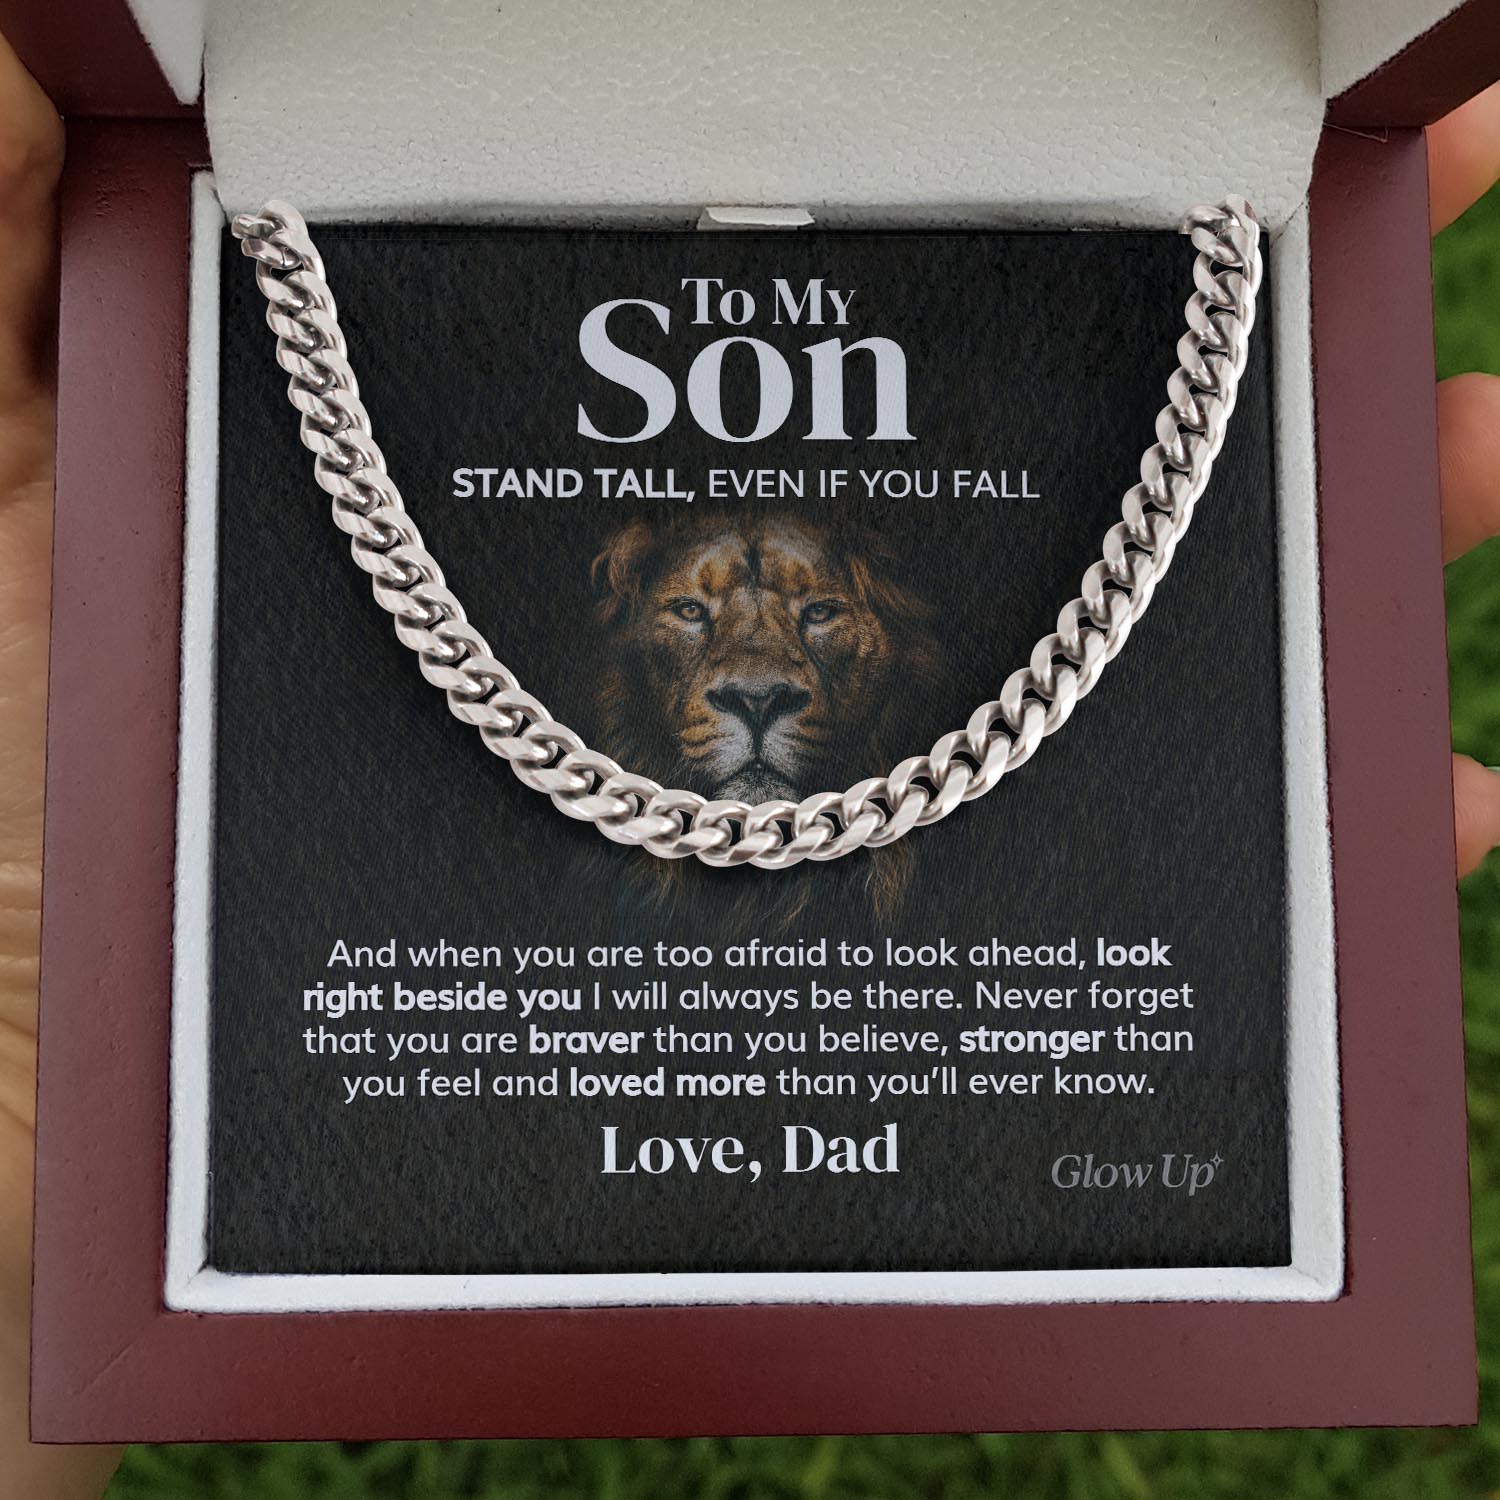 Glow Up Cuban Link Chain 316L Stainless Steel / Luxury LED Box To my Son from Dad - 5mm Cuban Link Chain - Stand Tall